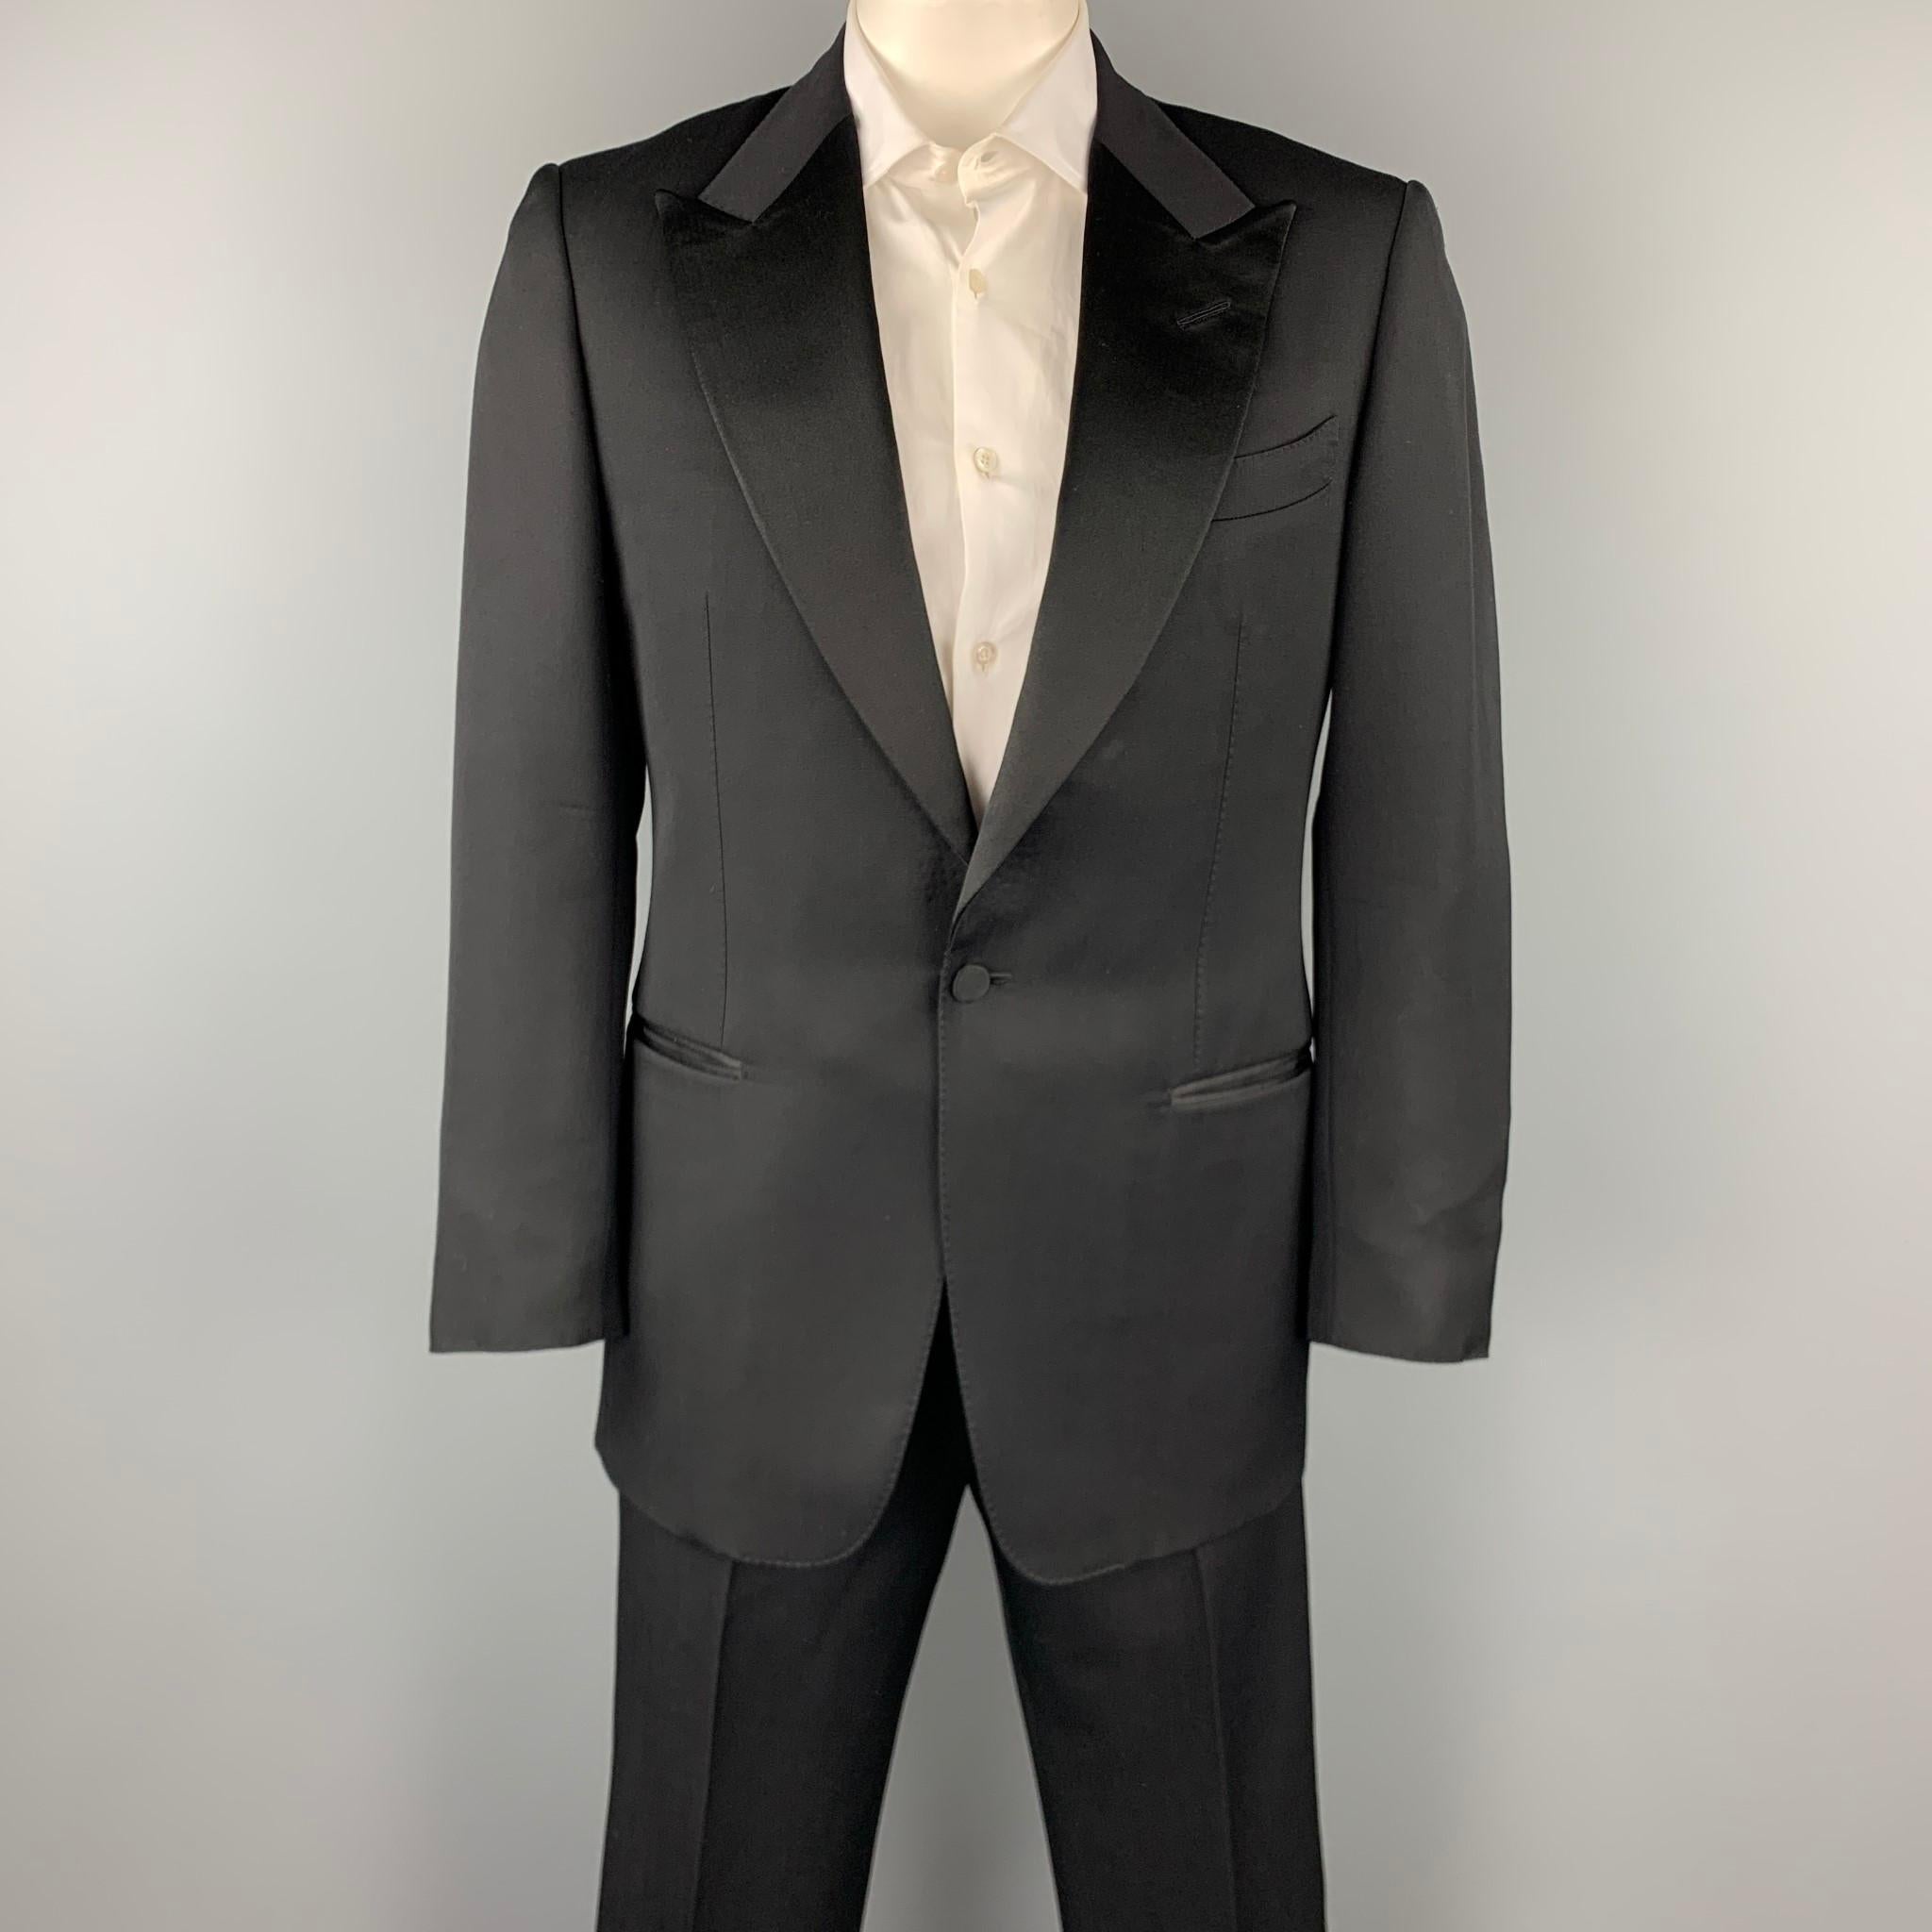 TOM FORD suit comes in a black wool / mohair with a full liner and includes a single breasted, single button sport coat with a peak lapel and matching flat front trousers.

Very Good Pre-Owned Condition.
Marked: 50